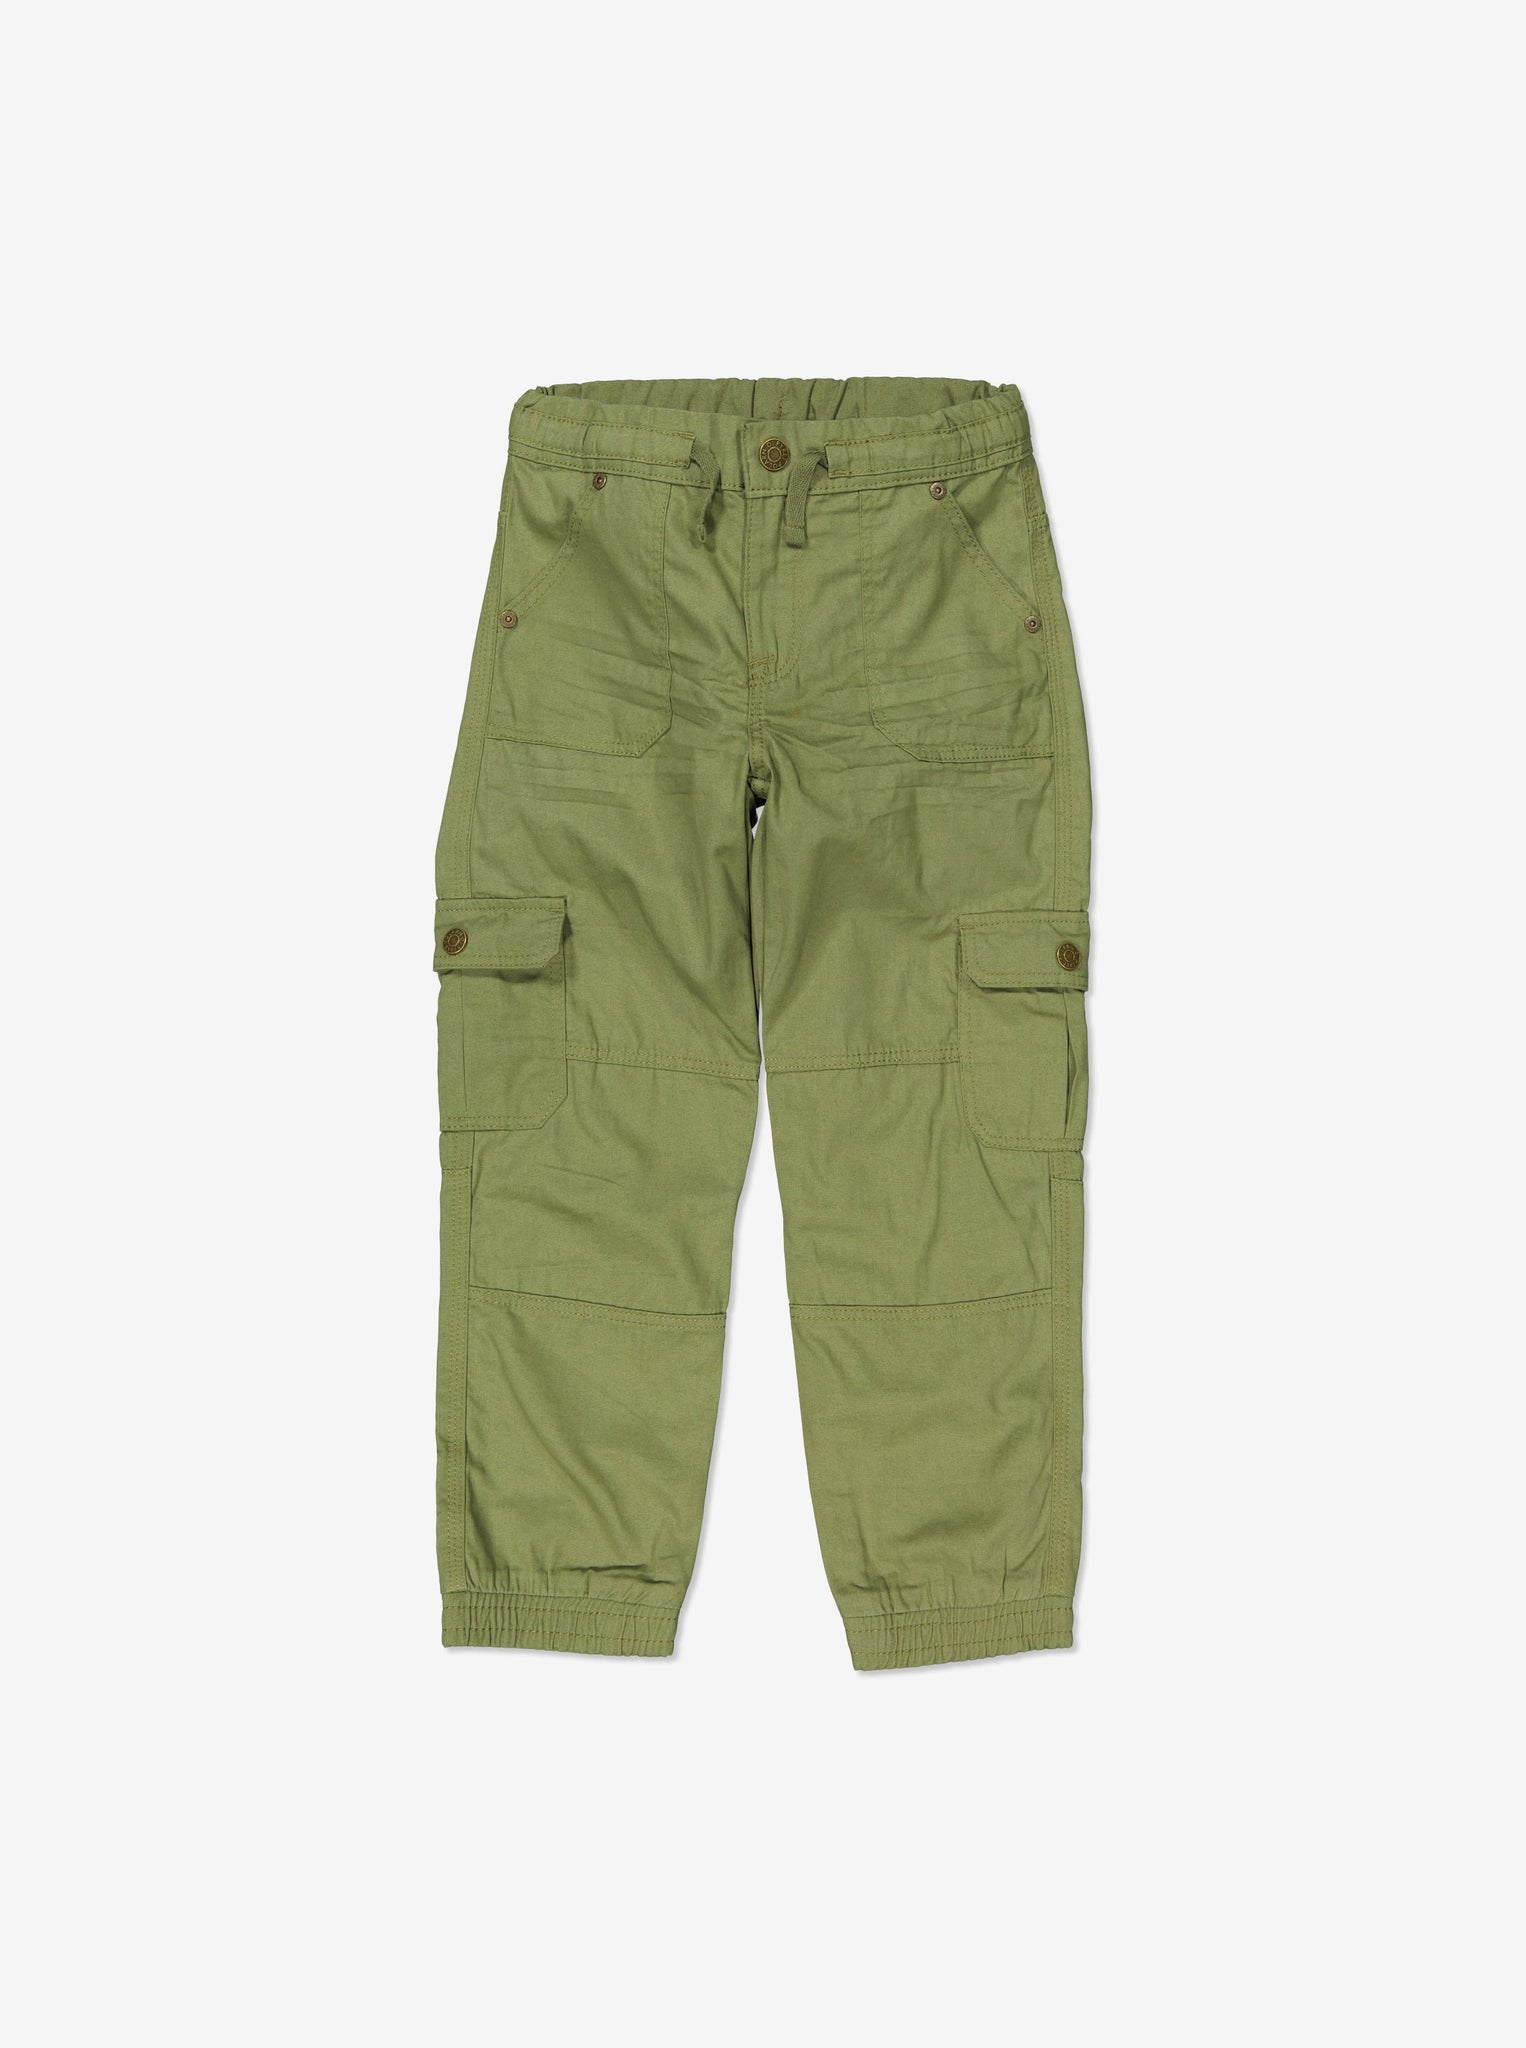  Organic Green Kids Cargo Trousers from Polarn O. Pyret Kidswear. Made with 100% organic cotton.